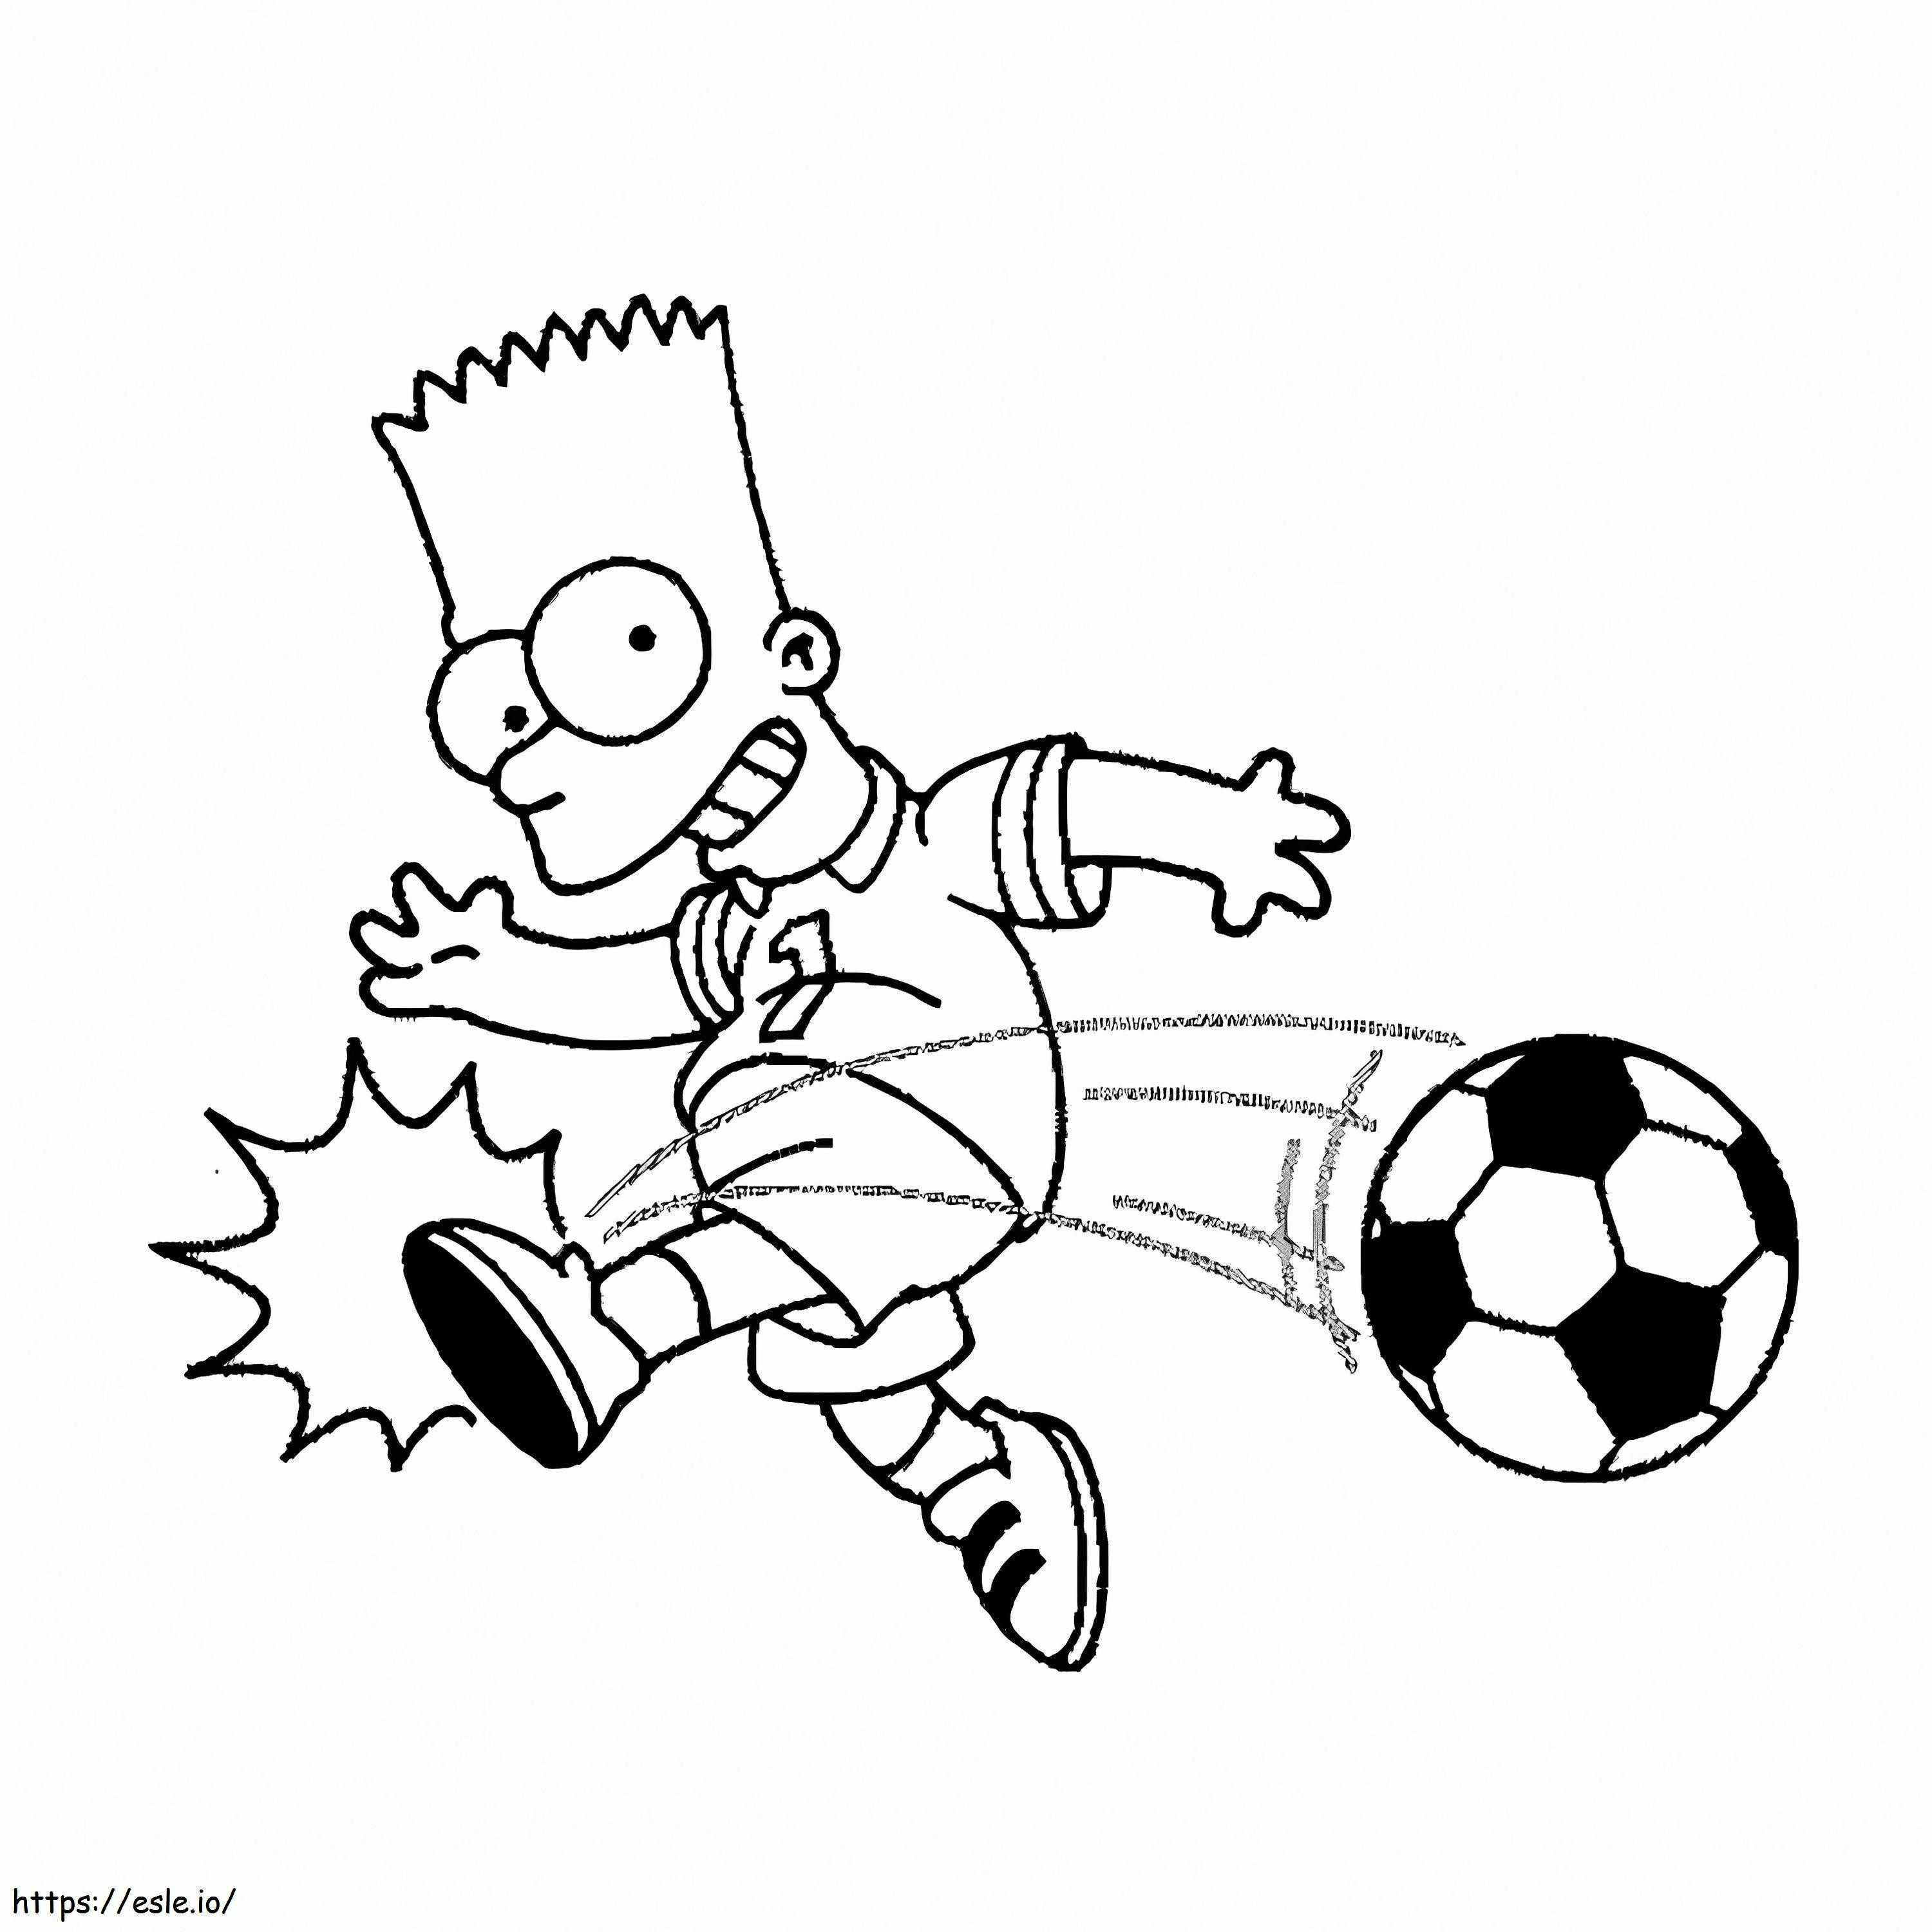 Bart Plays Soccer coloring page